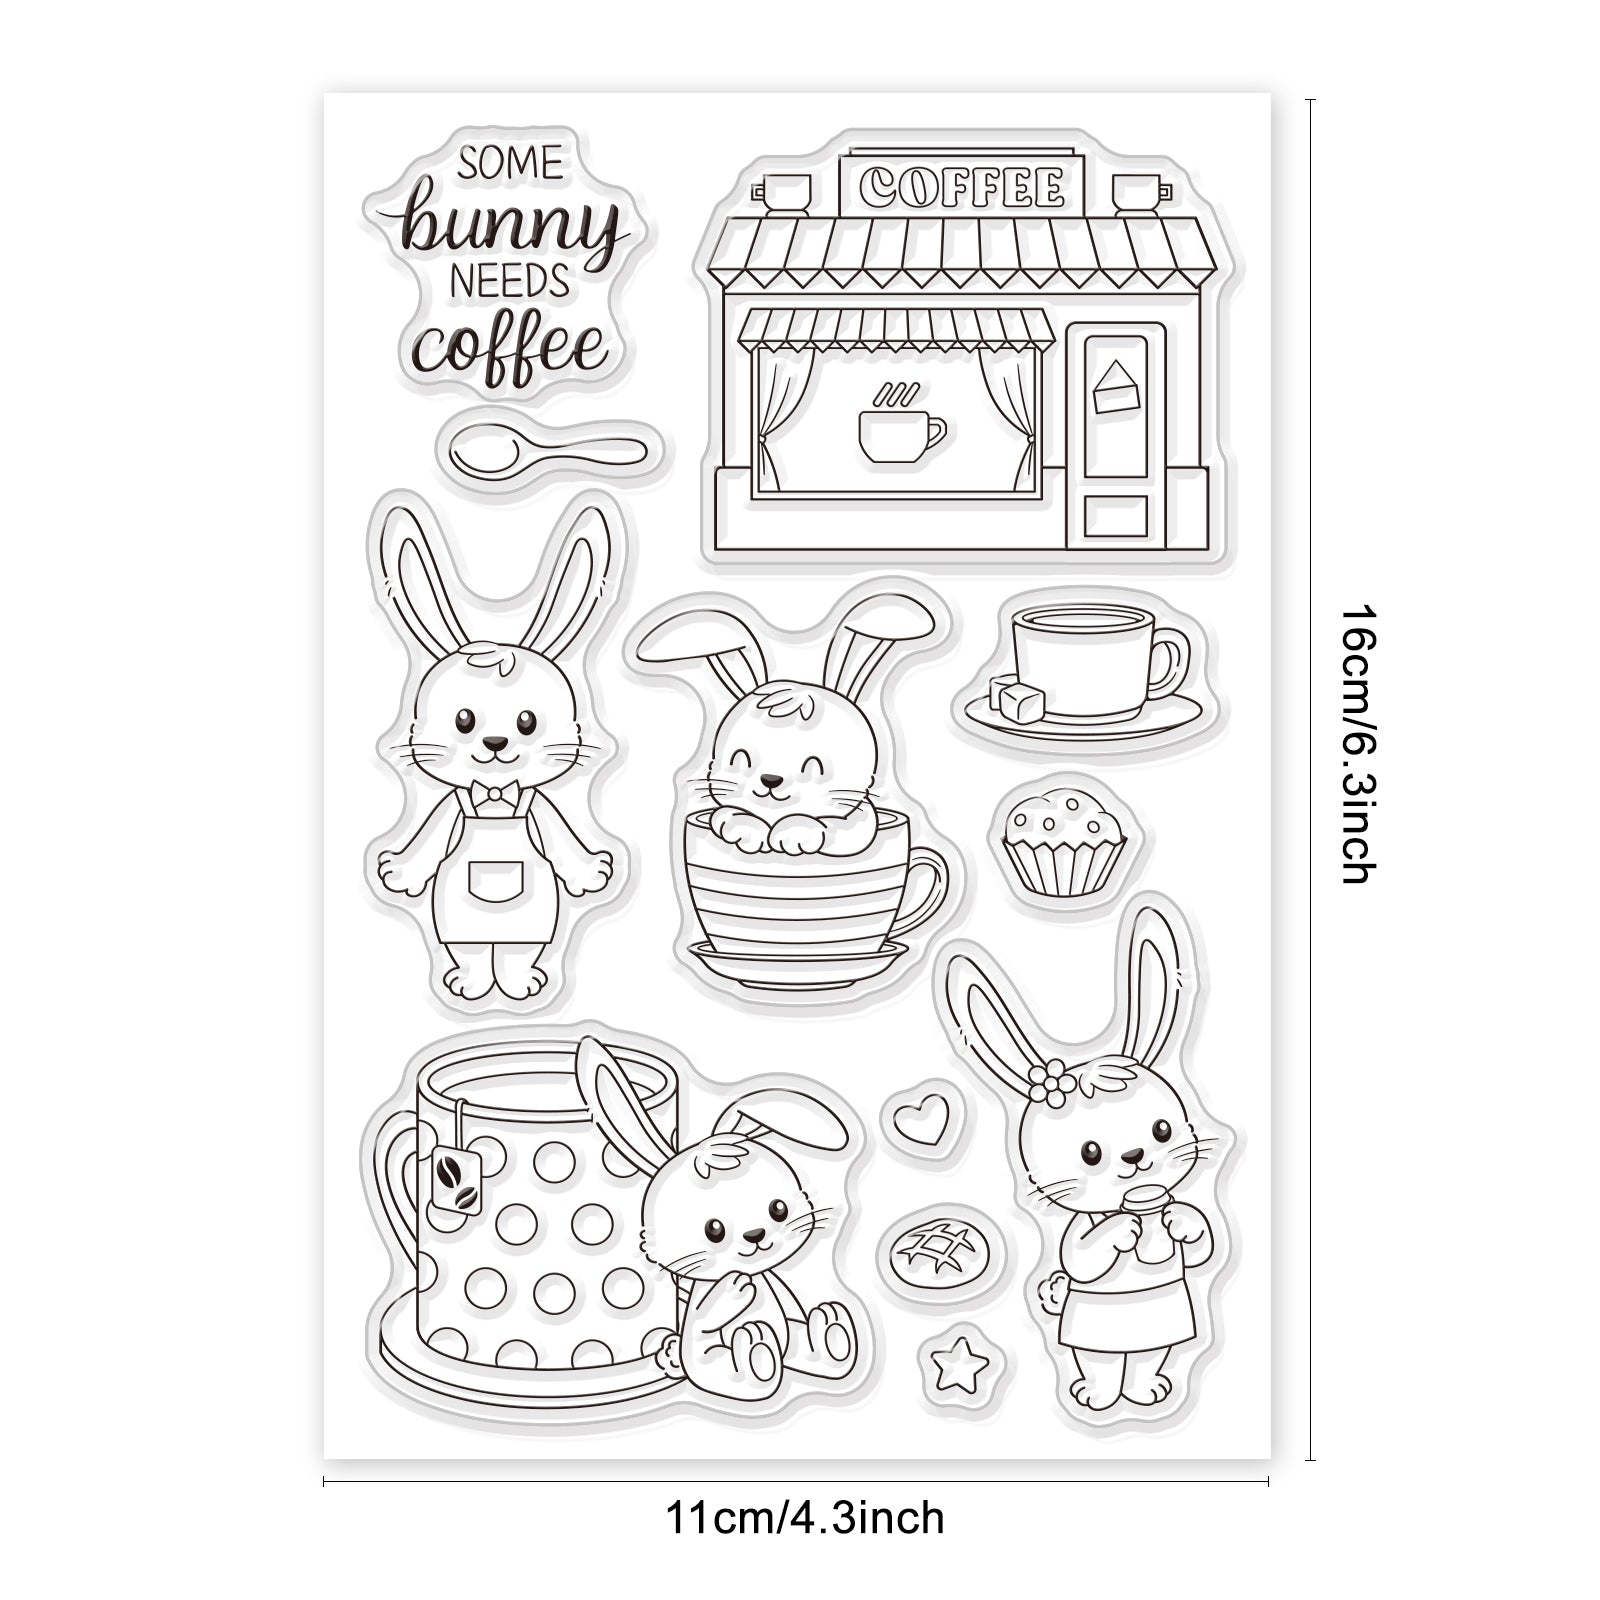 Globleland Rabbit, Cafe, Dessert, Spoon, Cake, Coffee, Tea Clear Silicone Stamp Seal for Card Making Decoration and DIY Scrapbooking